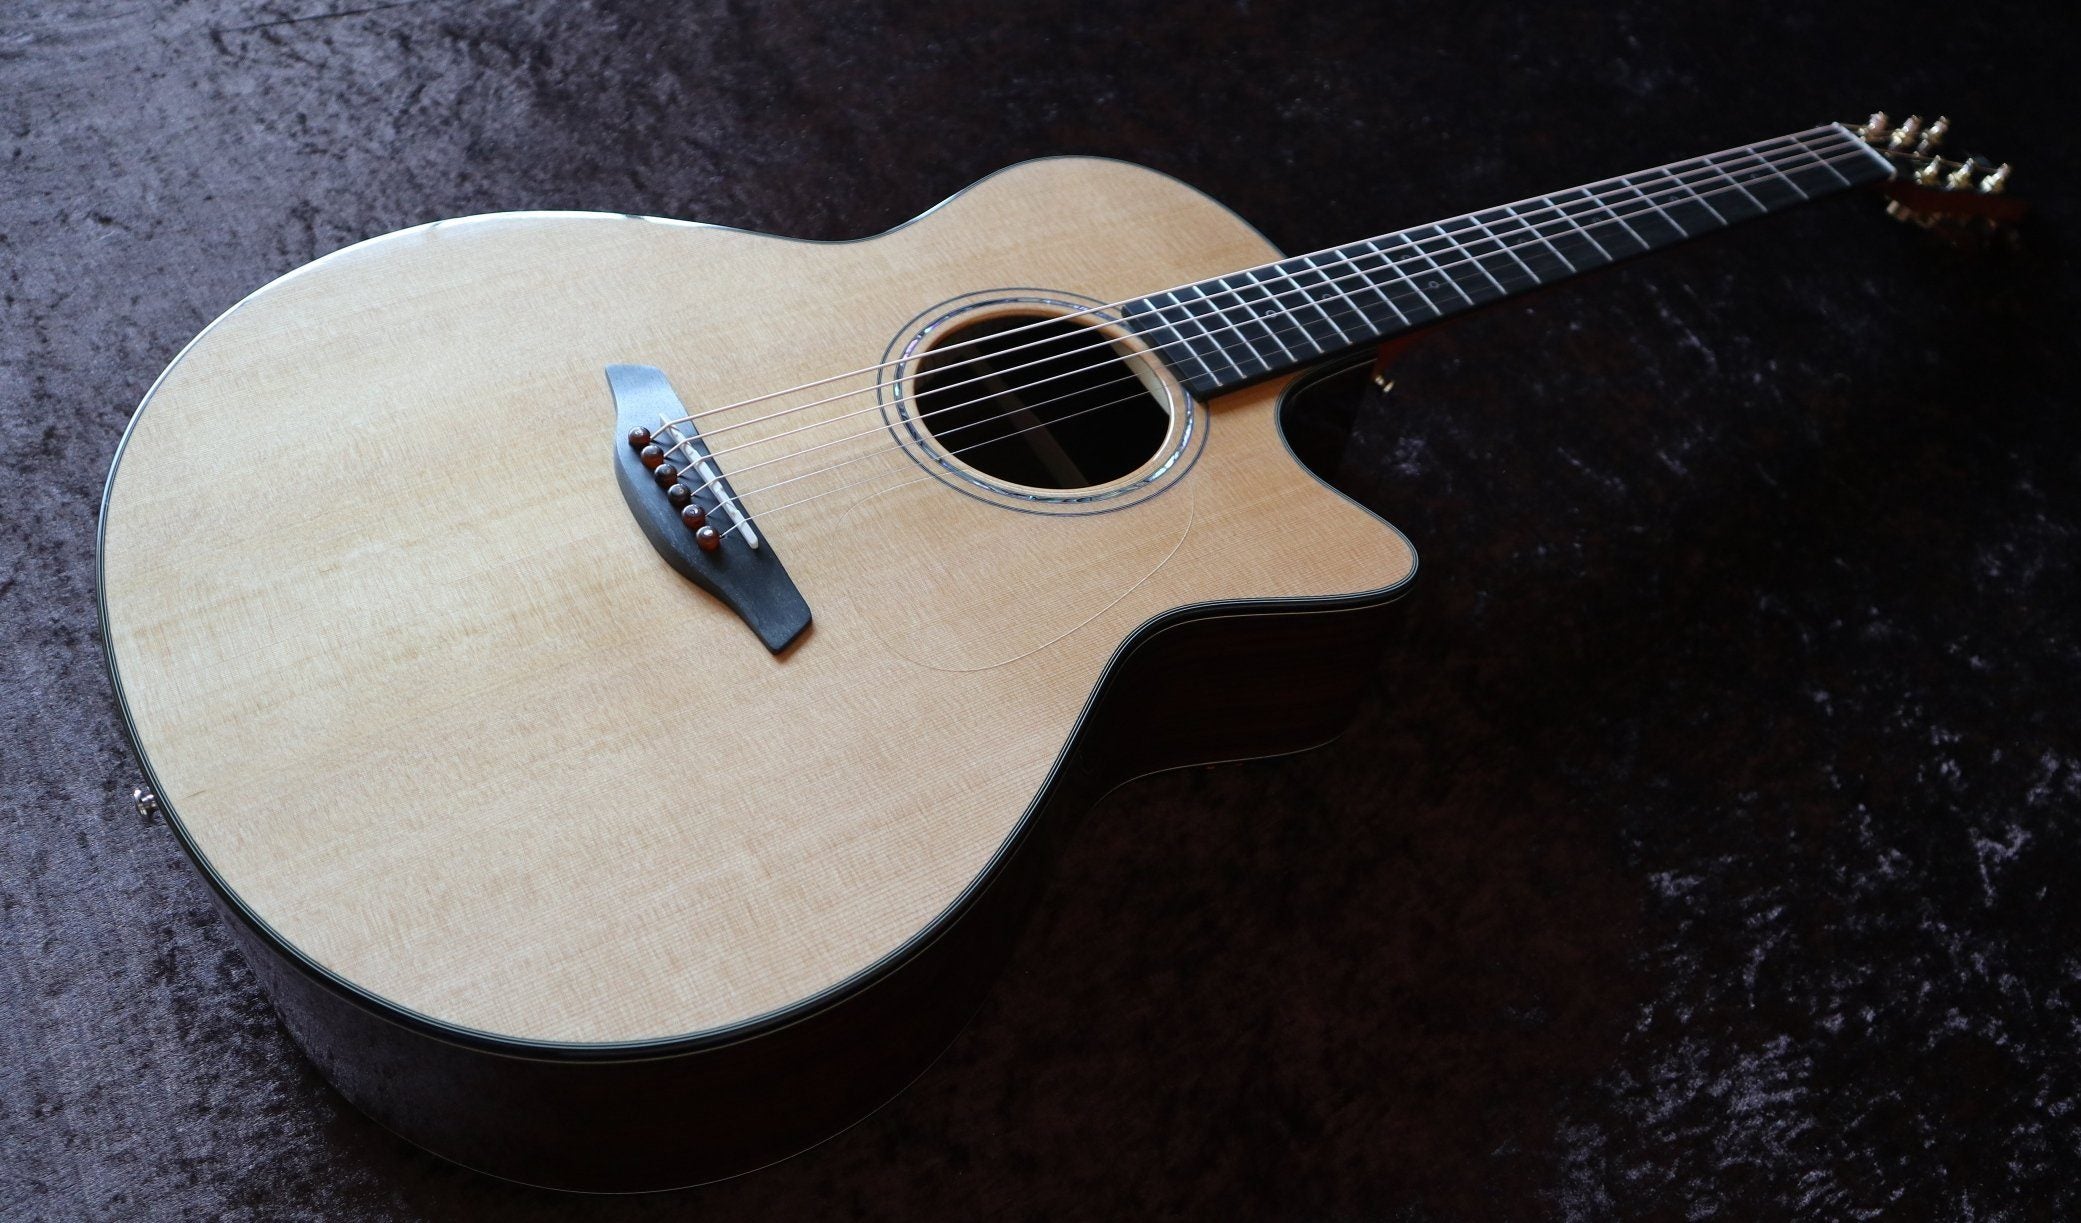 Furch Yellow Gc-CR Acoustic Guitar Including World Exclusive Inlays & Over £100 Of Added Value FREE, Acoustic Guitar for sale at Richards Guitars.